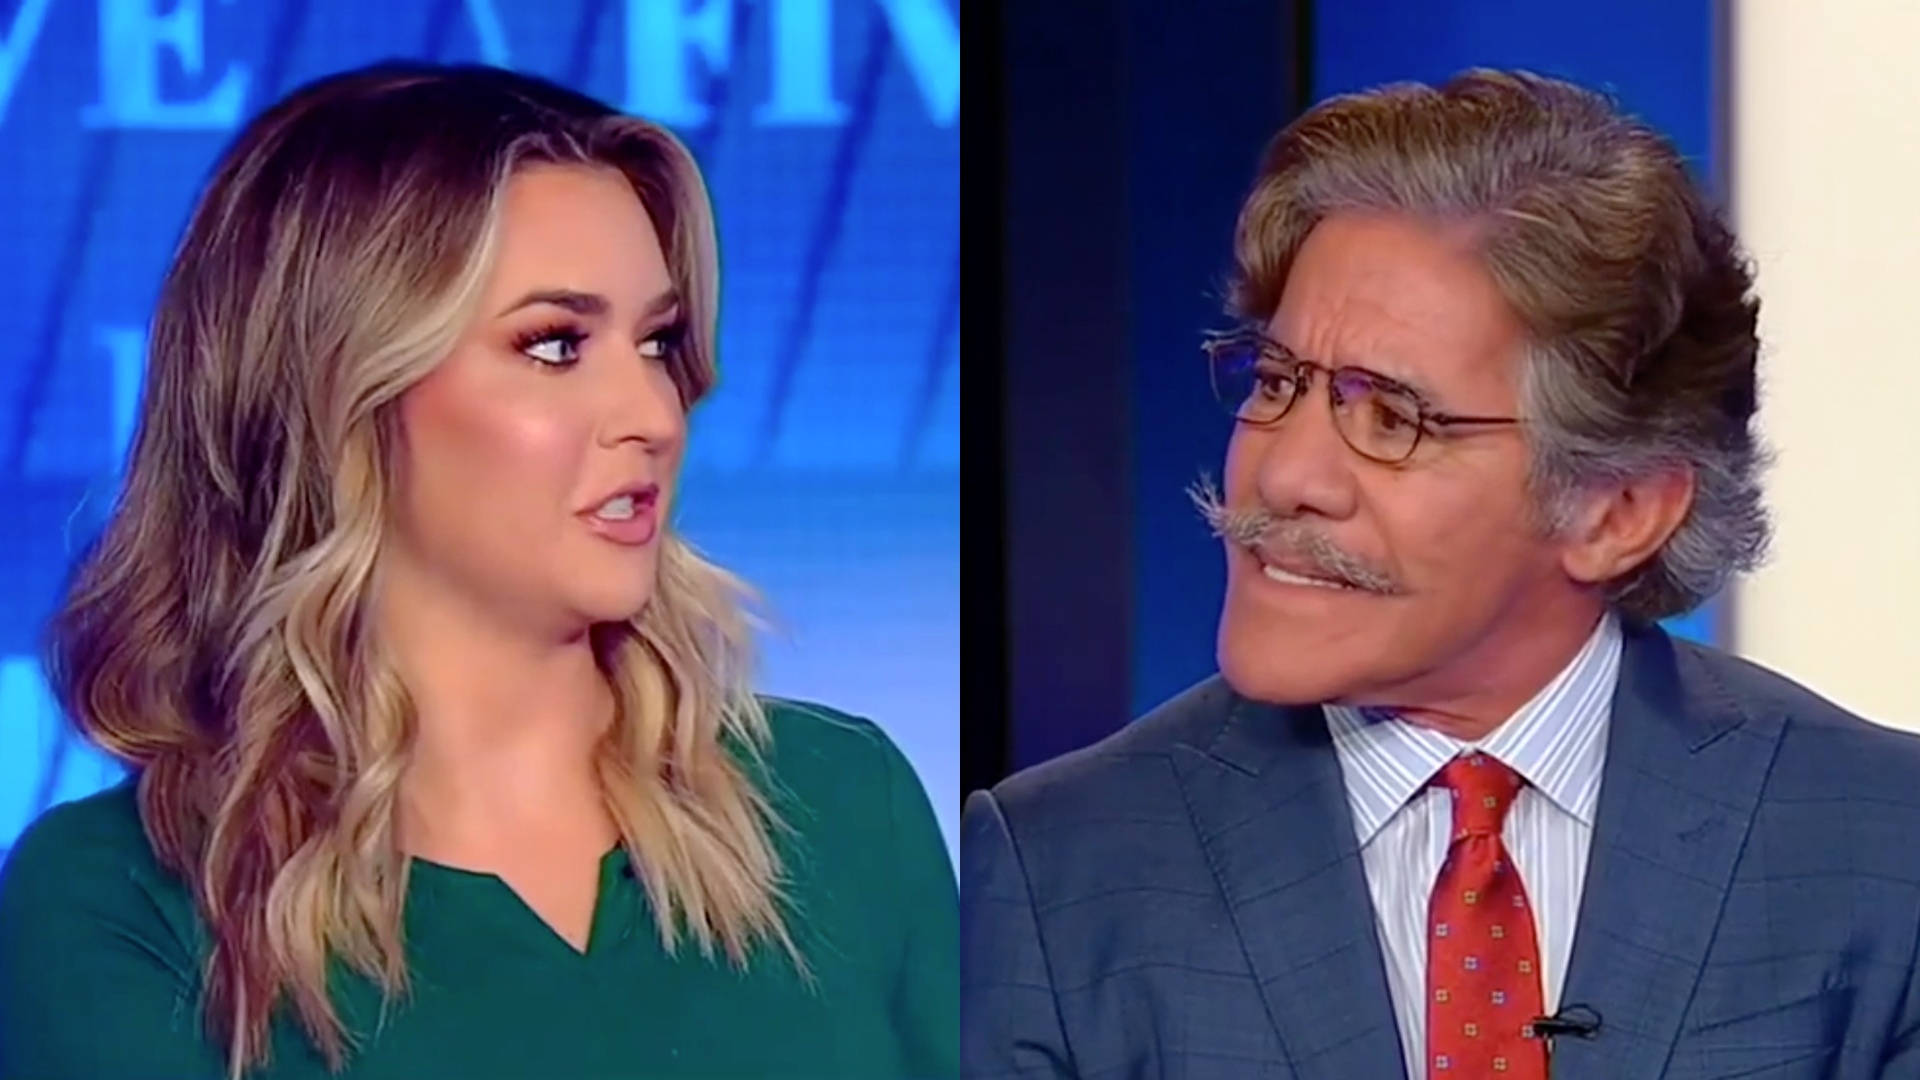 Geraldo defends Kamala Harris after Fox News co-host insults her: 'That's so mean'